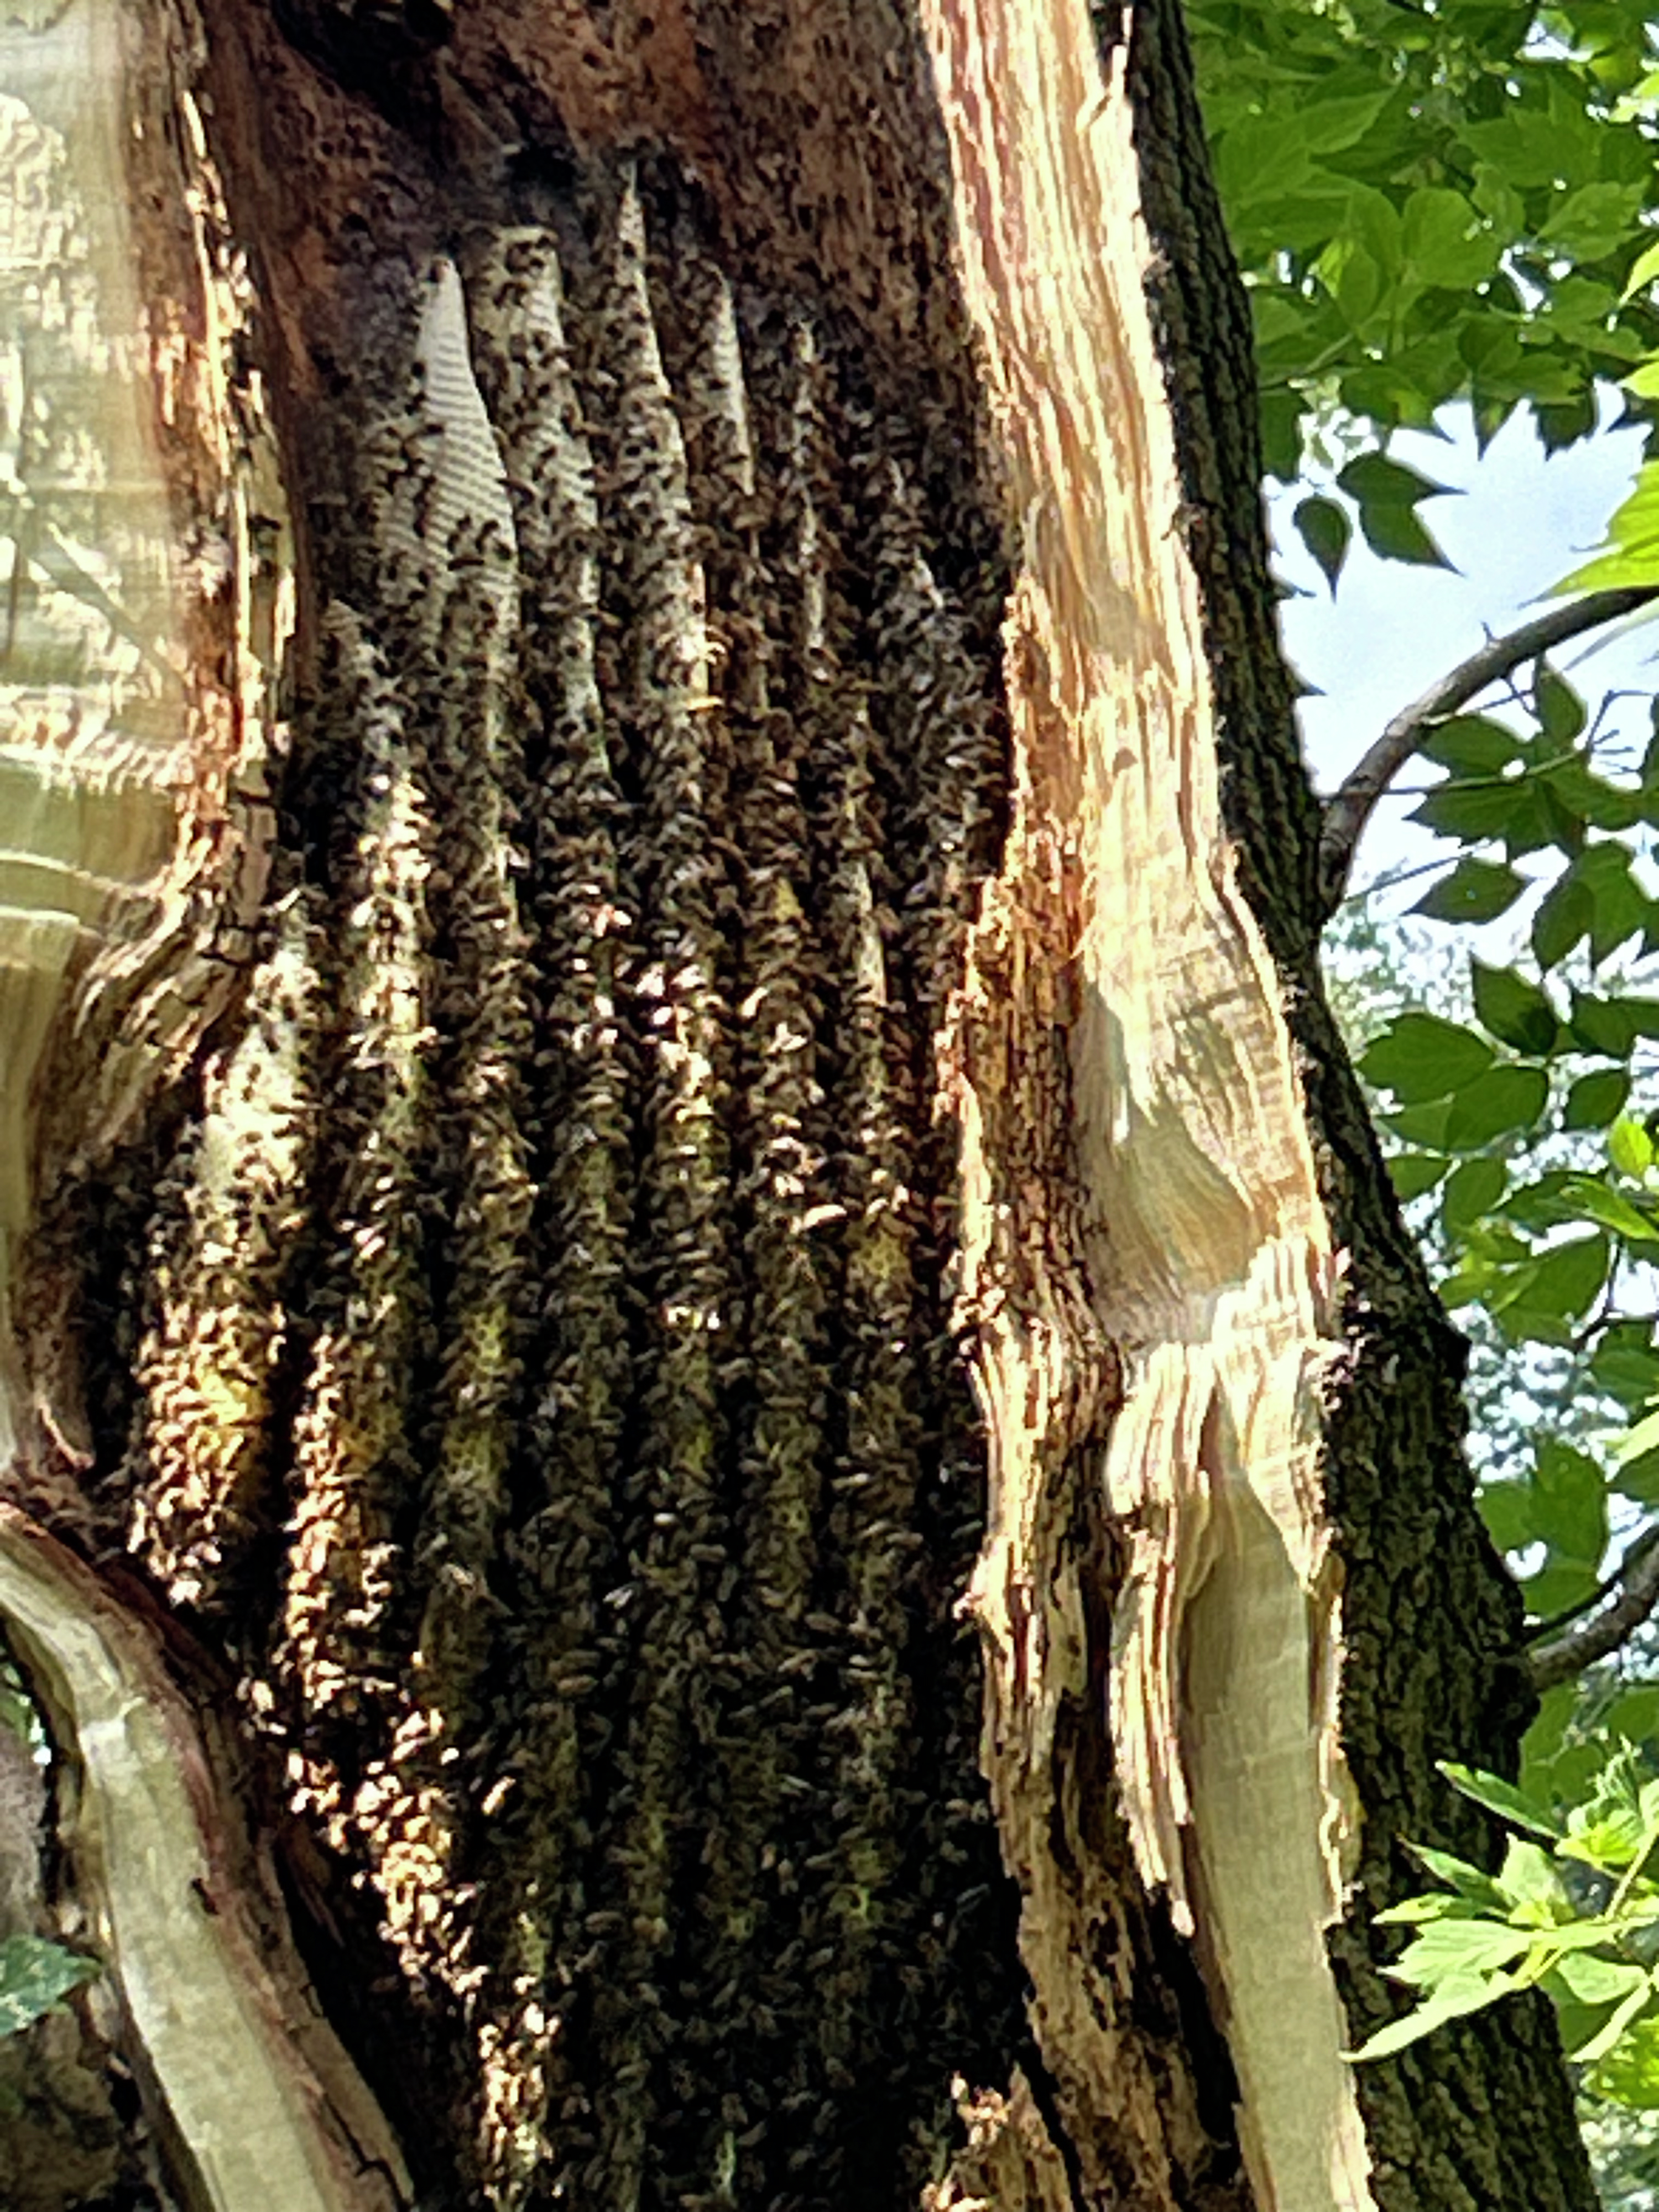 Storm damage cleanup helps save giant honey bee hive